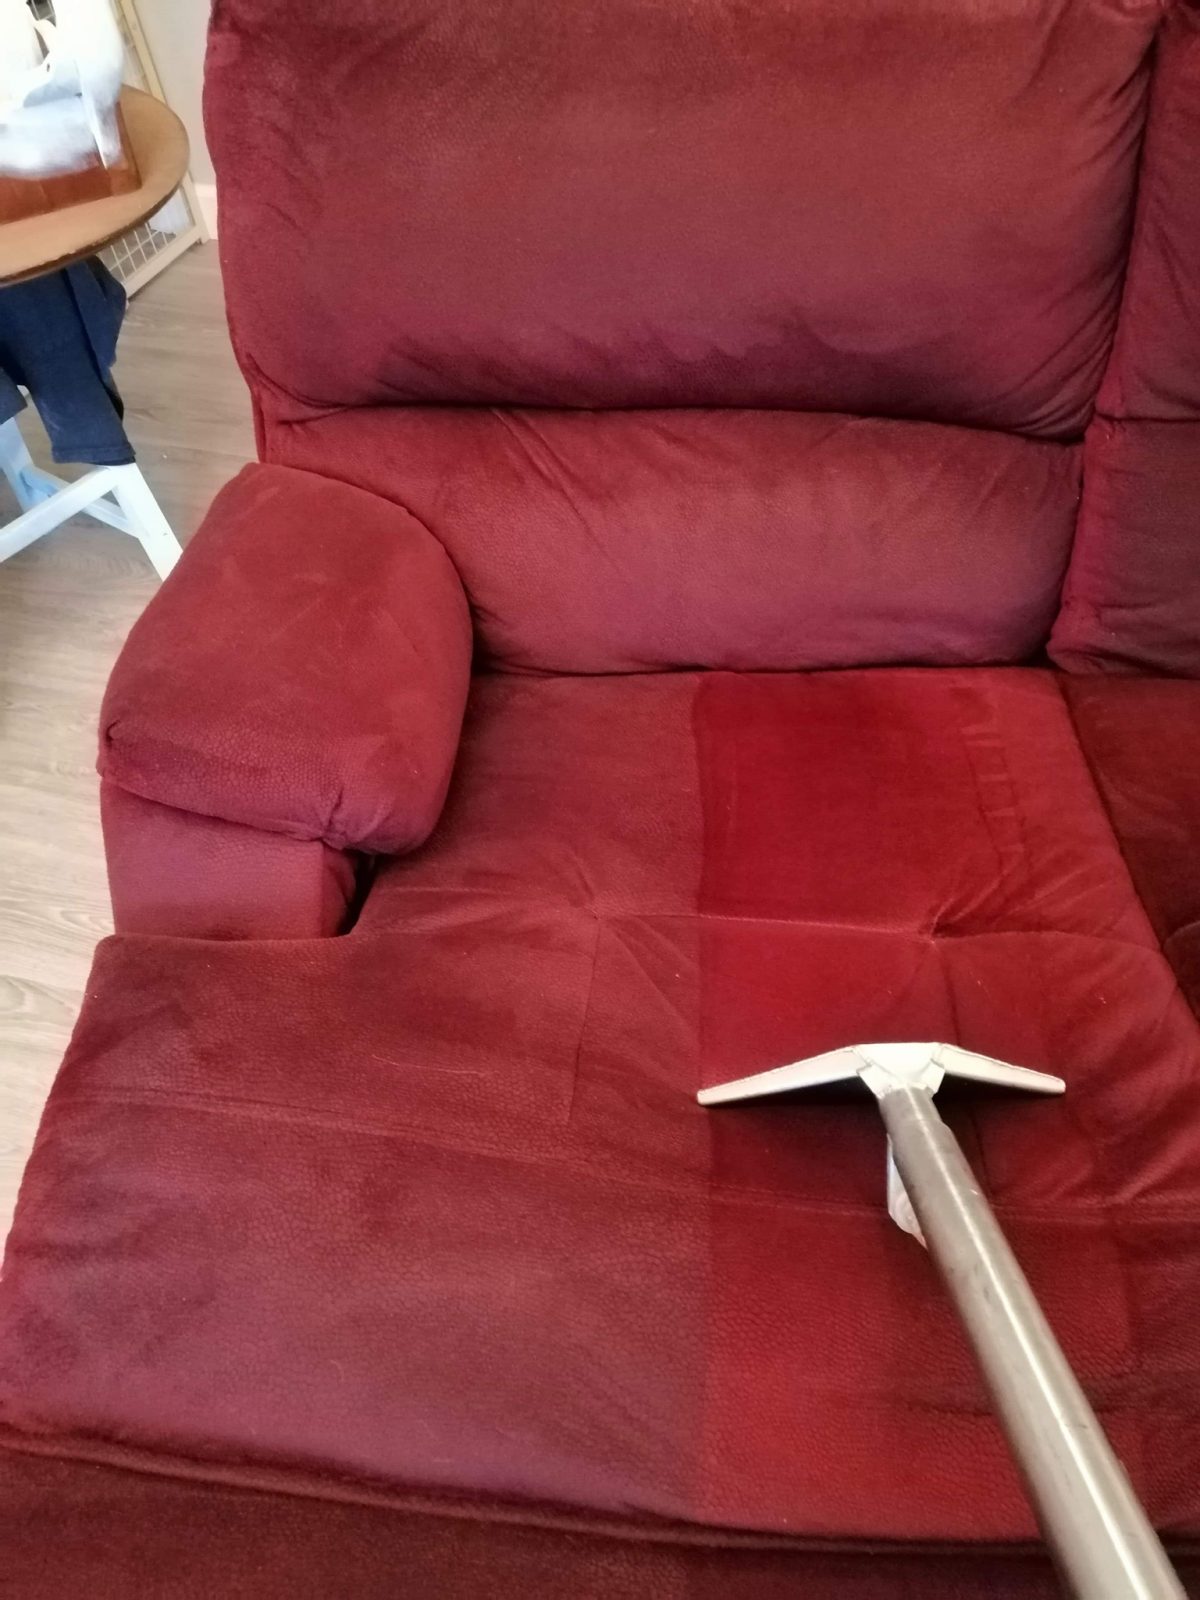 Professional Upholstery Cleaning Trinity Florida by Howards Cleaning Service